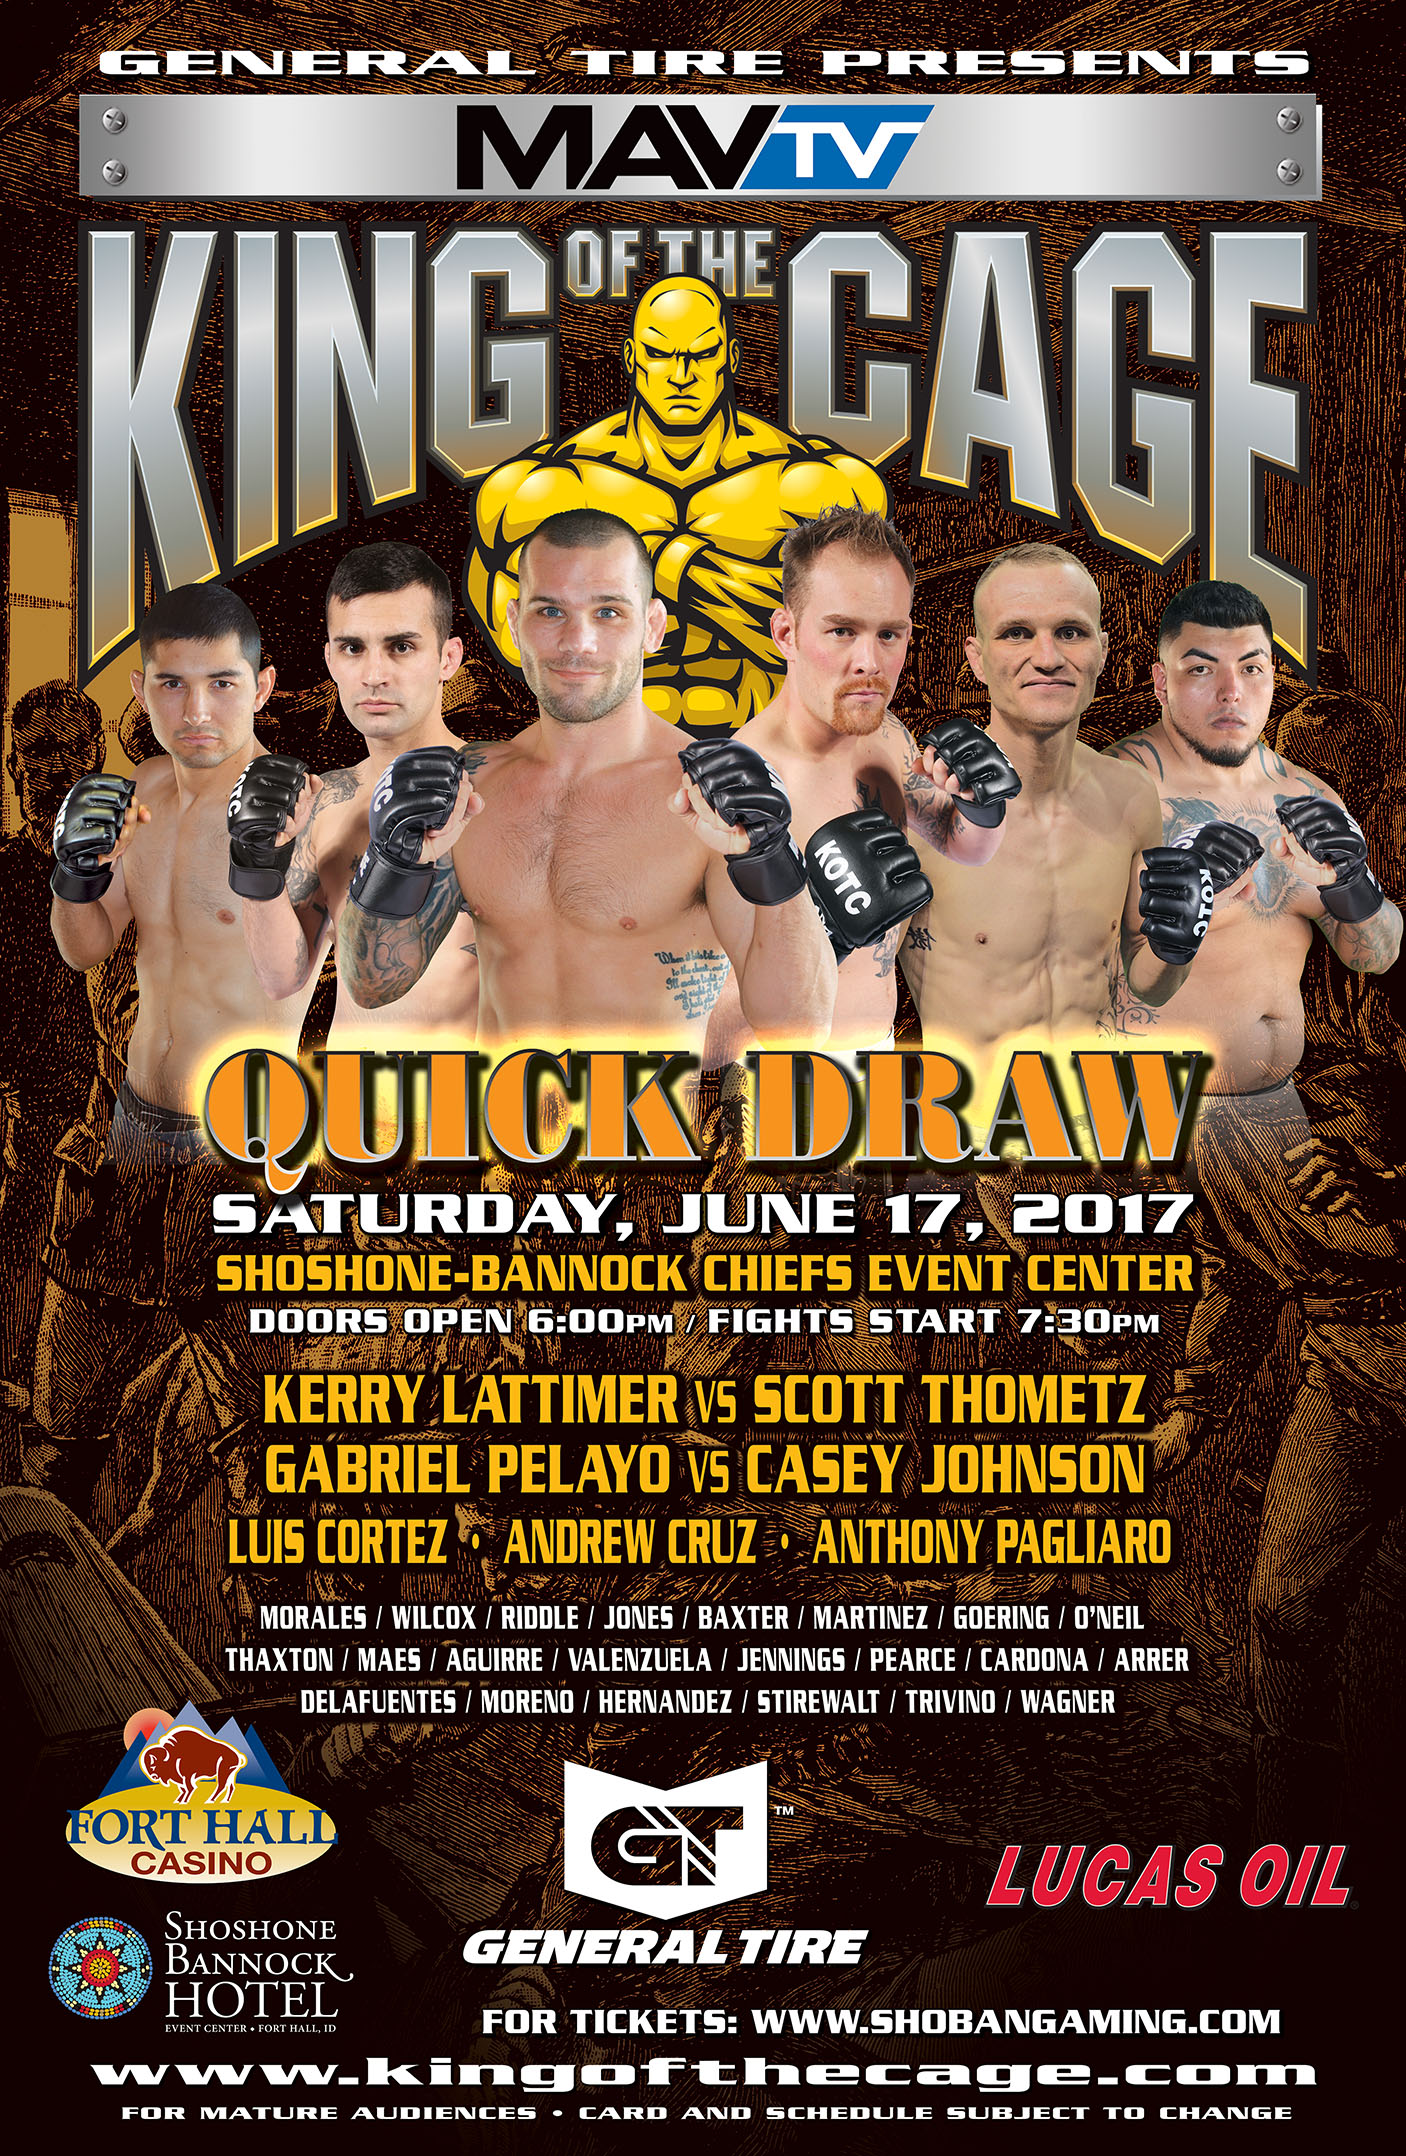 King of the Cage Returns to Fort Hall Casino on June 17 for “QUICK DRAW”